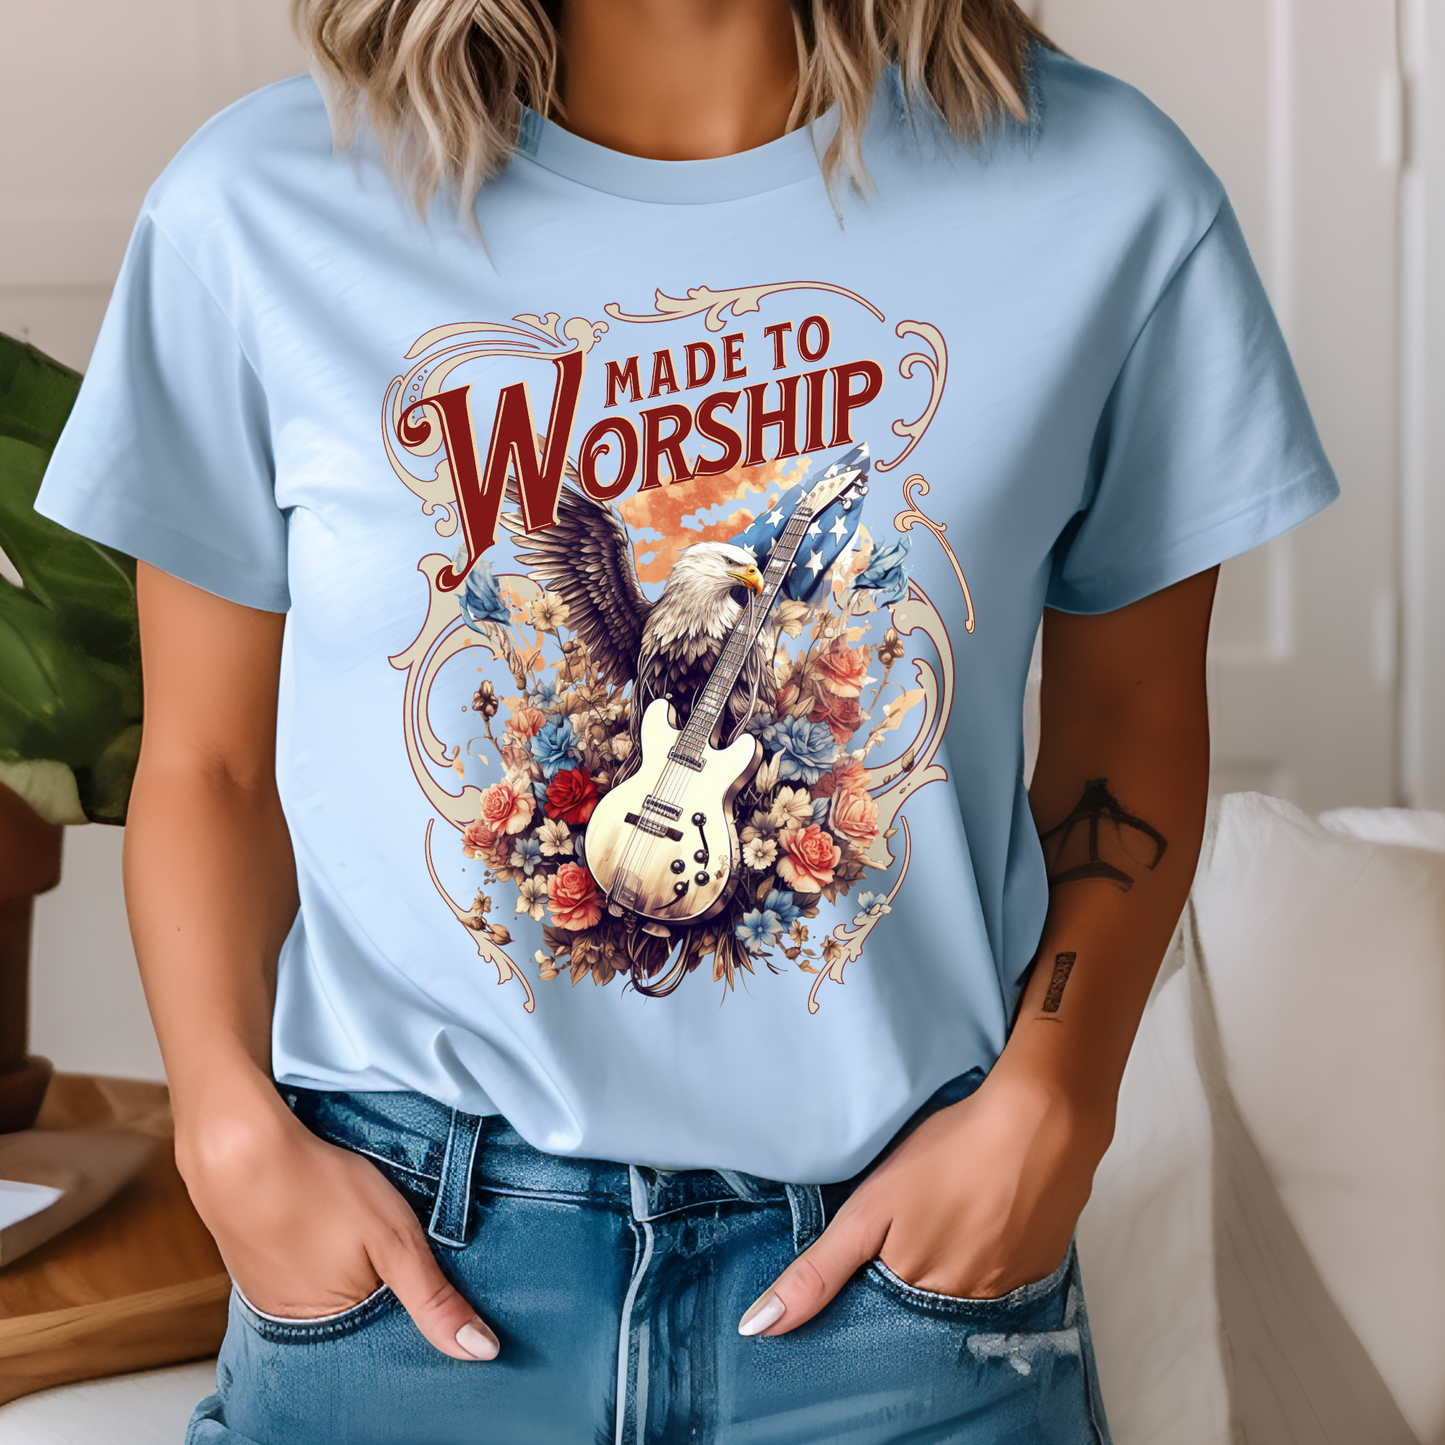 Made To Worship Tee - Additional colors